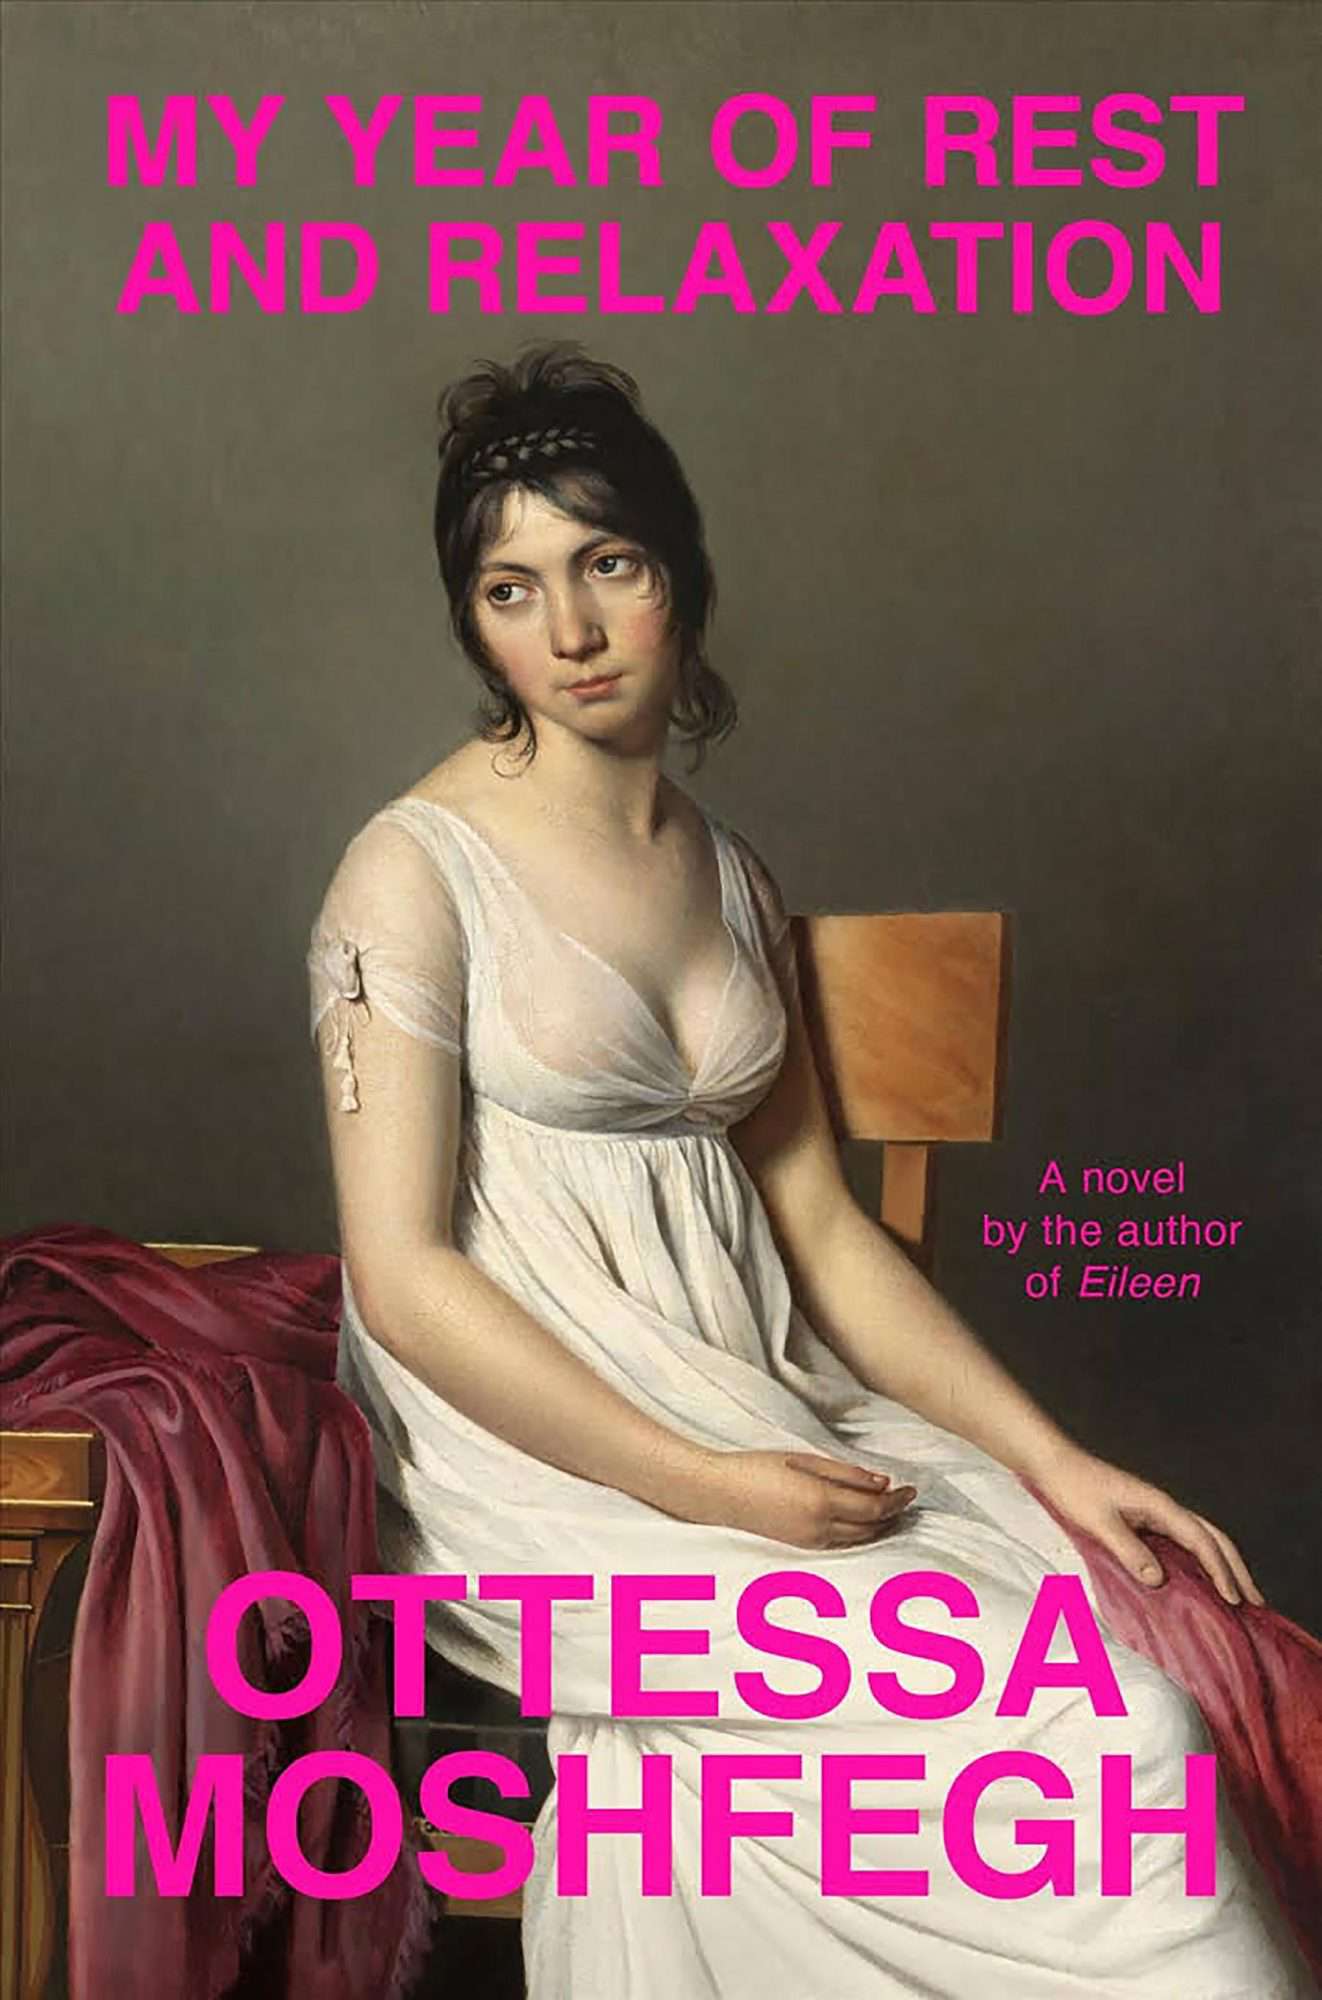 My Year of Rest and Relaxation&nbsp;by Ottessa Moshfegh